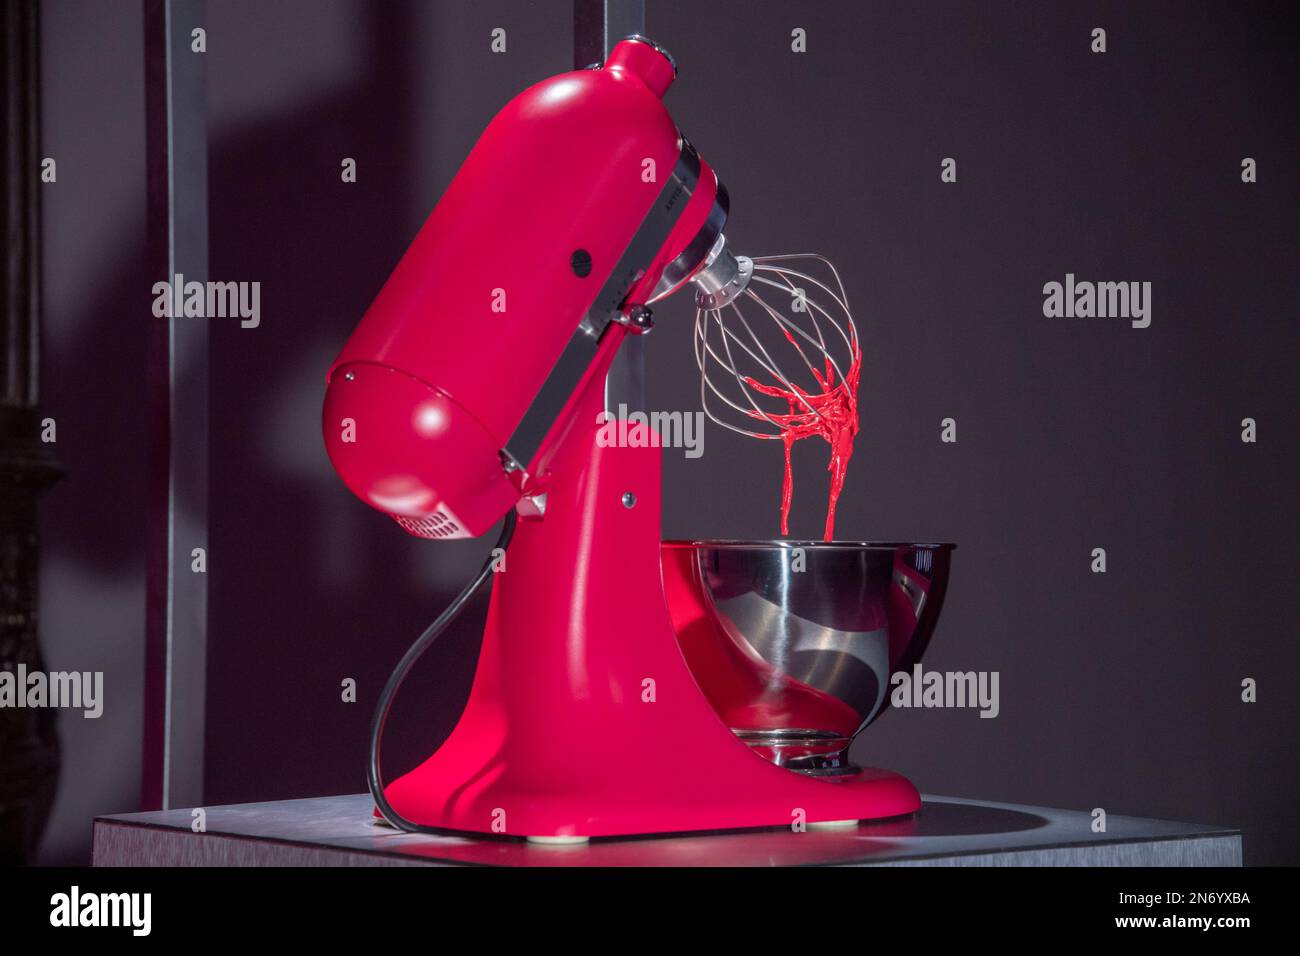 https://c8.alamy.com/comp/2N6YXBA/new-york-new-york-usa-9th-feb-2023-new-kitchenaid-amp-marta-del-rio-launch-the-2023-hibiscus-color-of-the-year-collection-new-york-fashion-week-february-09-2023-new-york-new-york-usa-a-view-of-kitchenaid-products-on-display-as-kitchenaid-amp-marta-del-rio-launch-the-2023-hibiscus-color-of-the-year-collection-on-february-09-2023-in-new-york-city-credit-image-m10sthenews2-via-zuma-press-wire-editorial-usage-only!-not-for-commercial-usage!-2N6YXBA.jpg